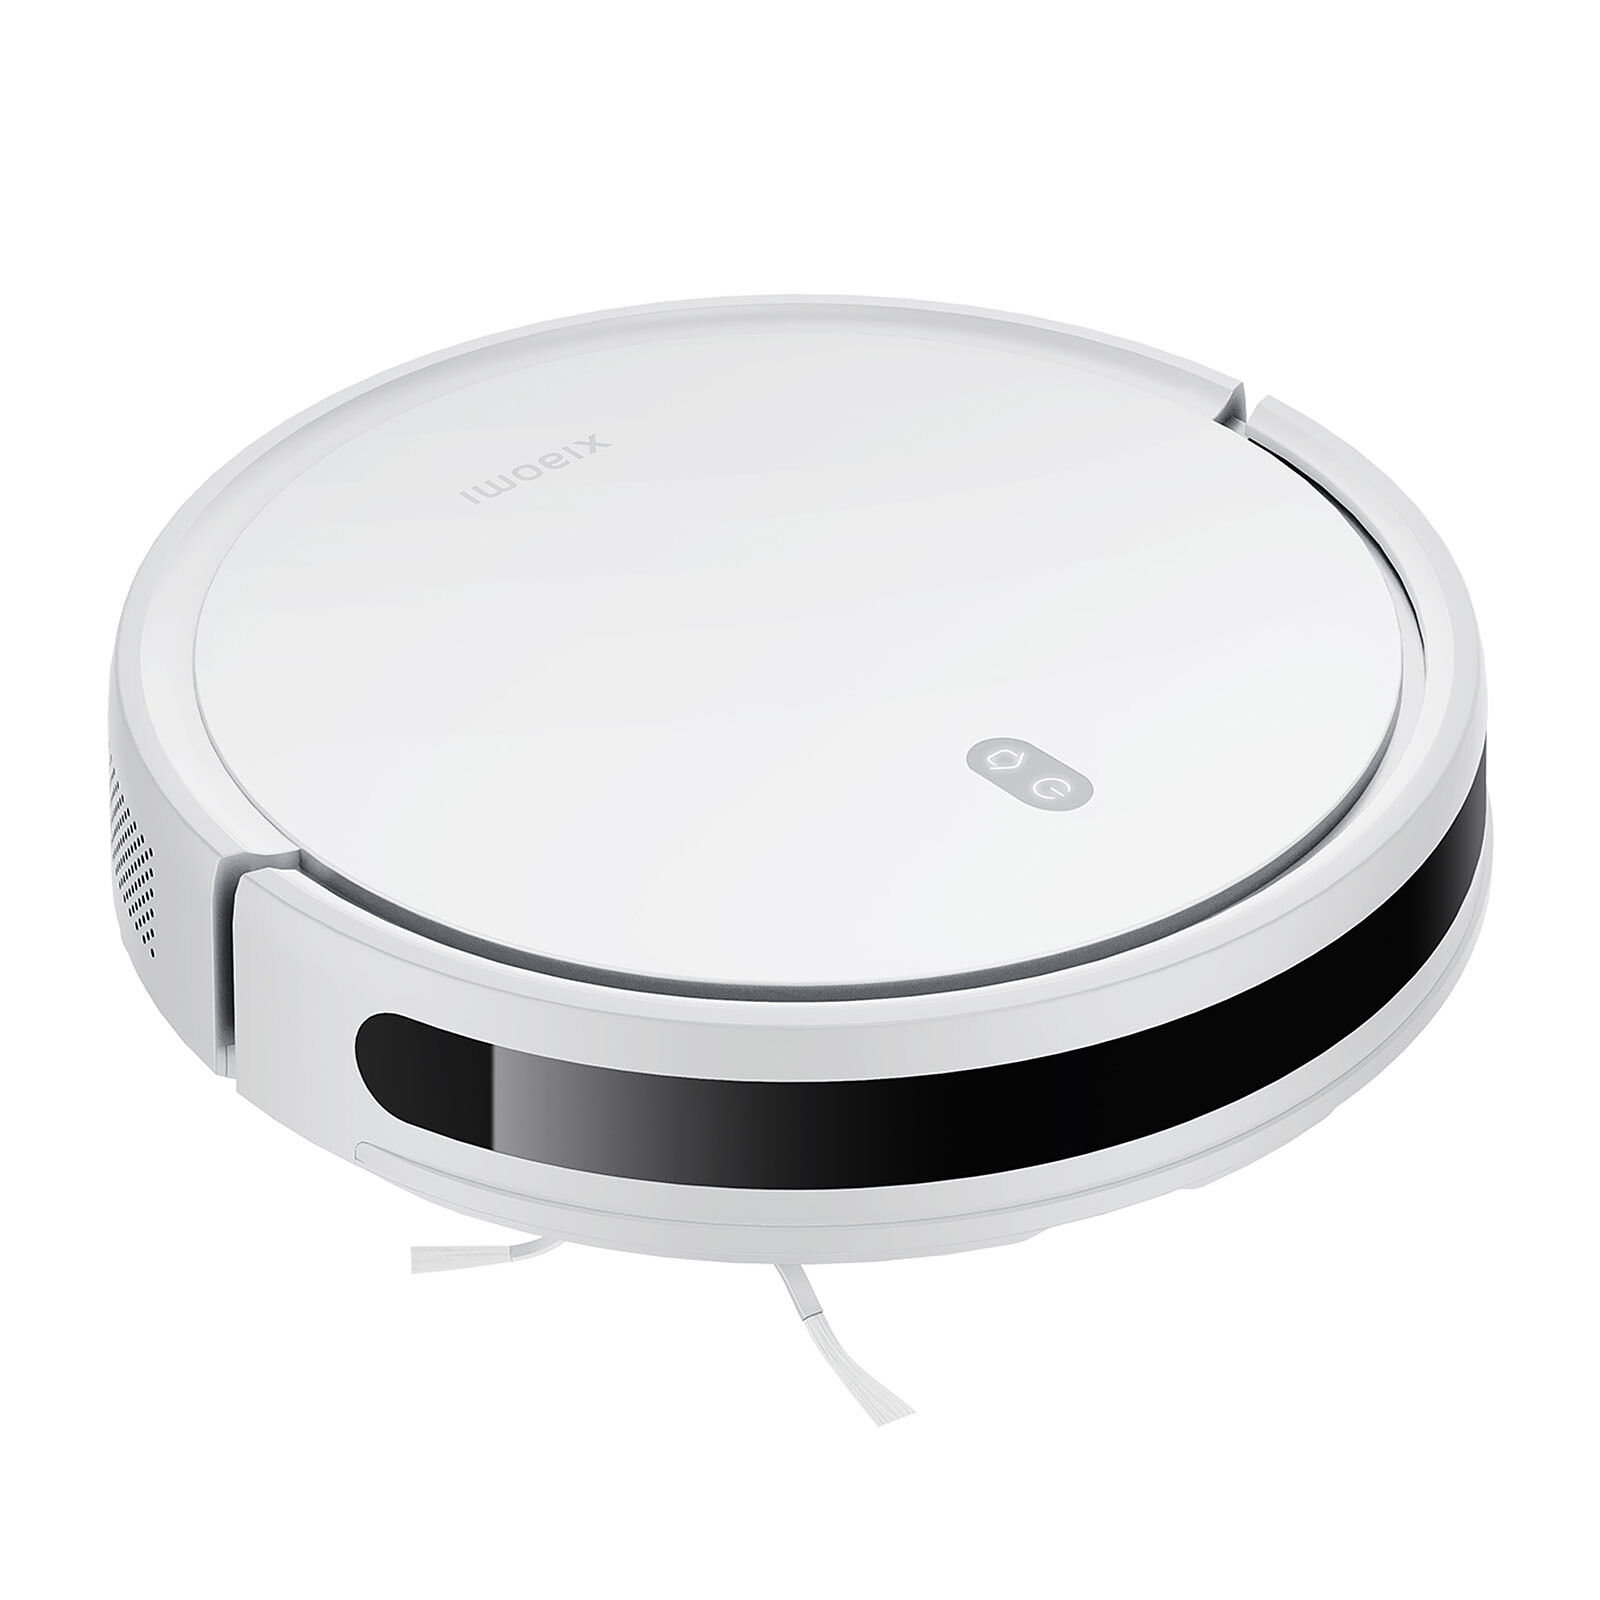 Unsupported device Xiaomi robot vacuum e12 · Issue #104278 · home